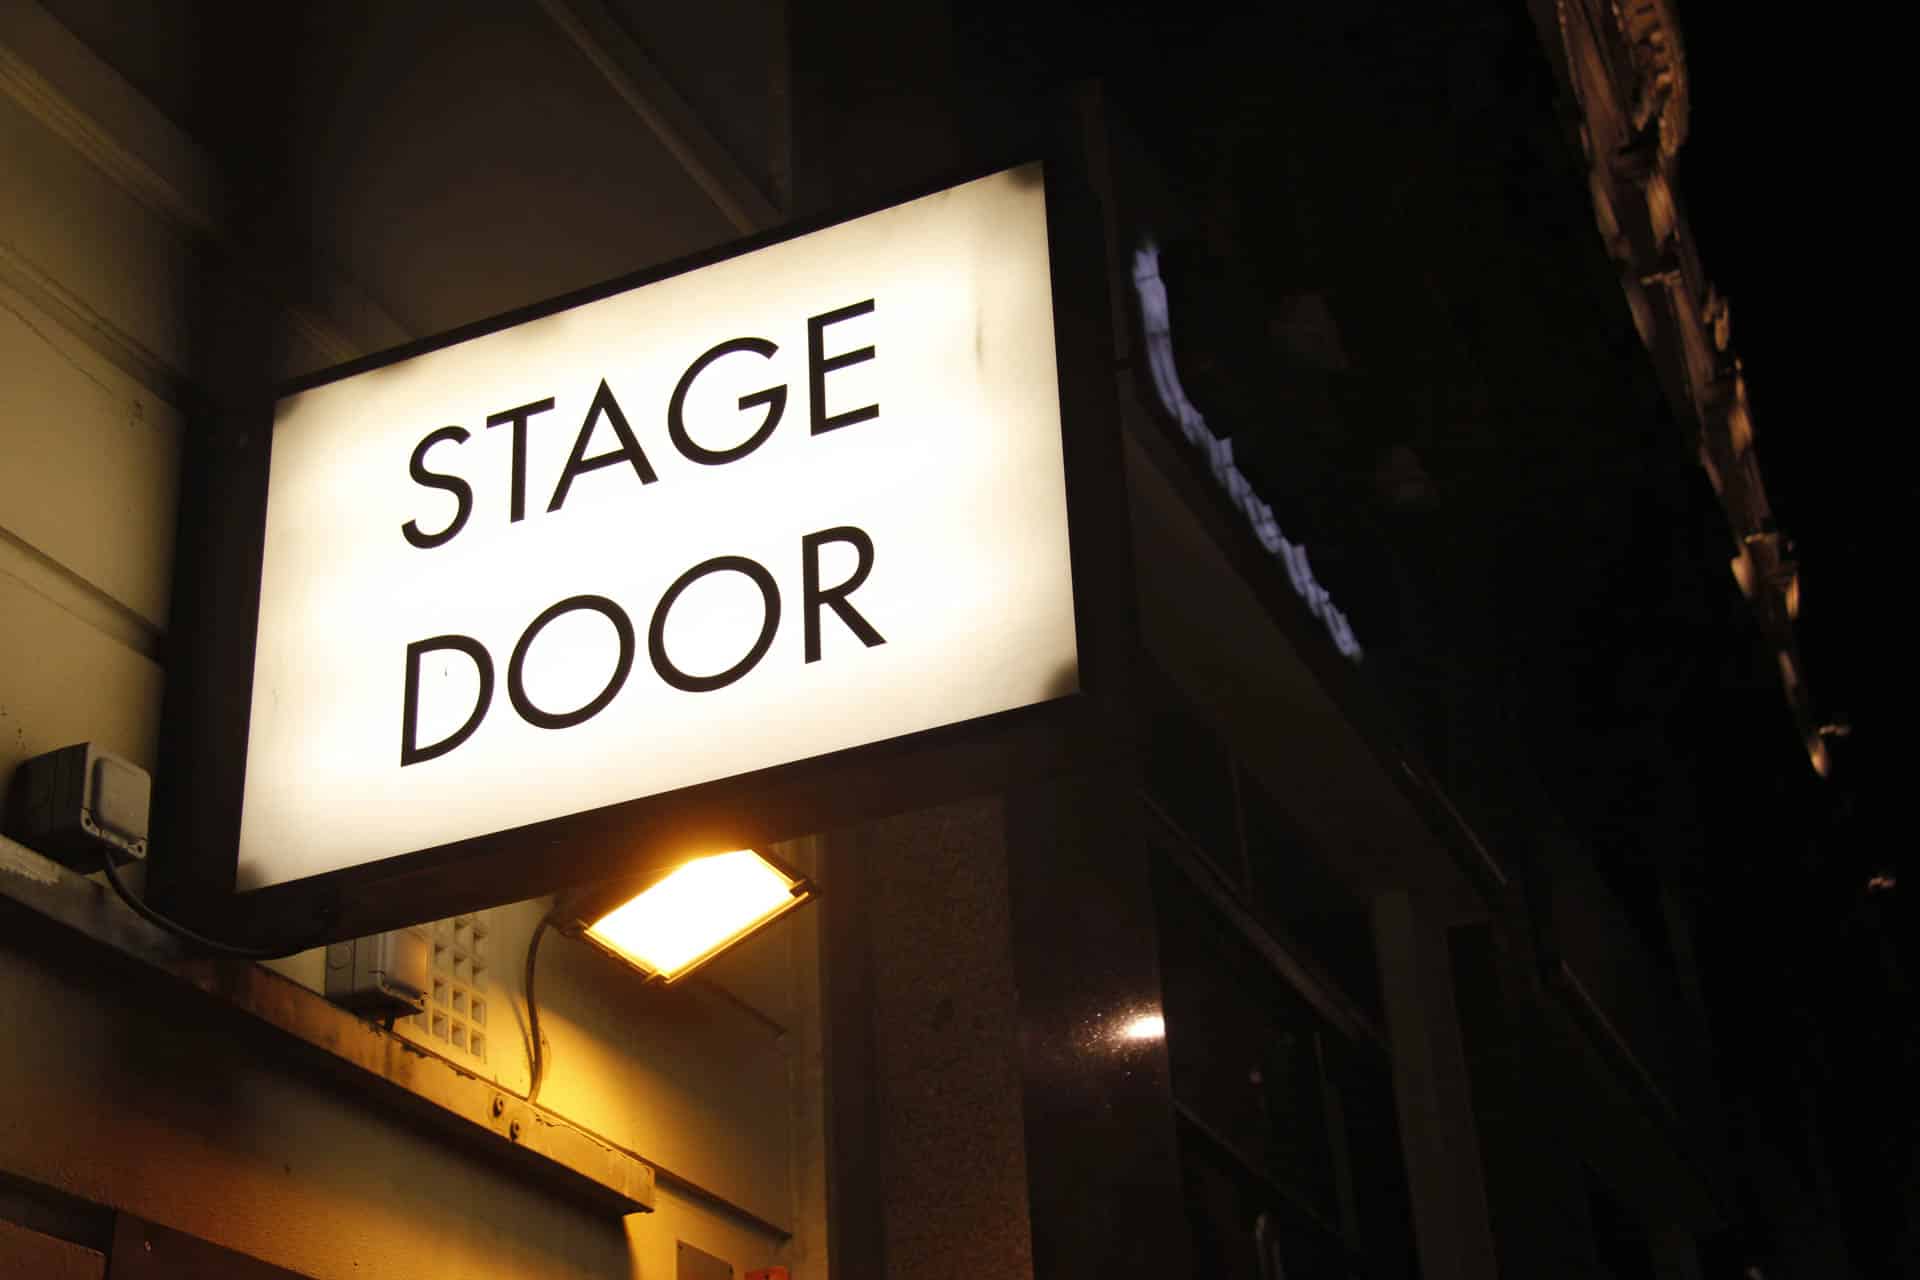 A Stage Door Sign Above A Theatre/Pub Building